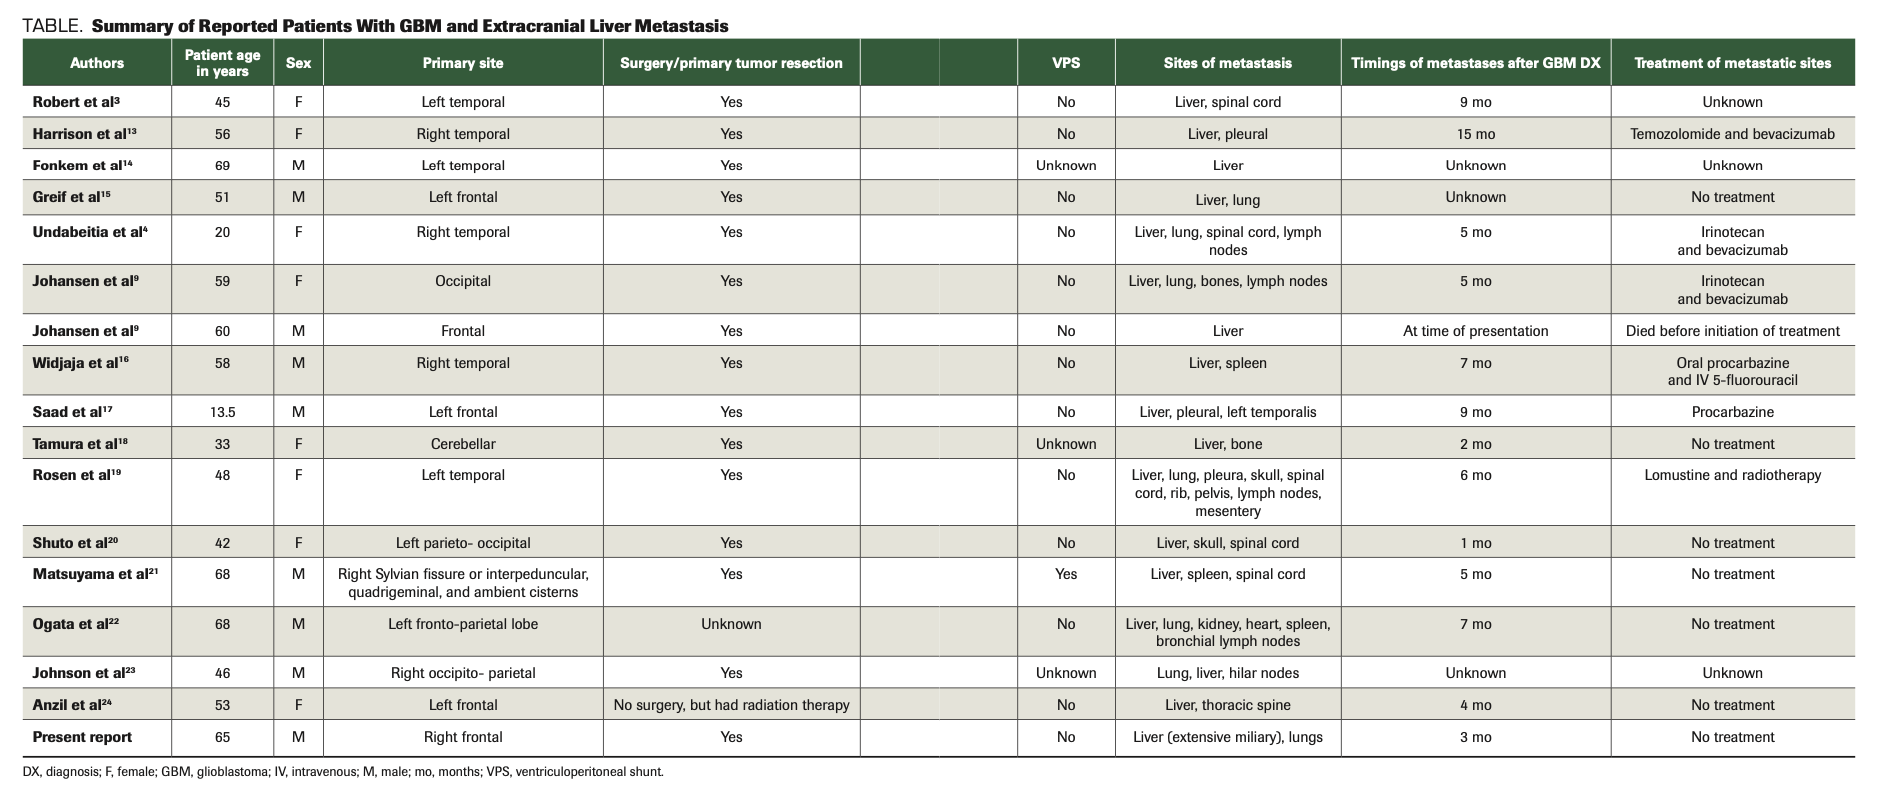 TABLE. Summary of Reported Patients With GBM and Extracranial Liver Metastasis